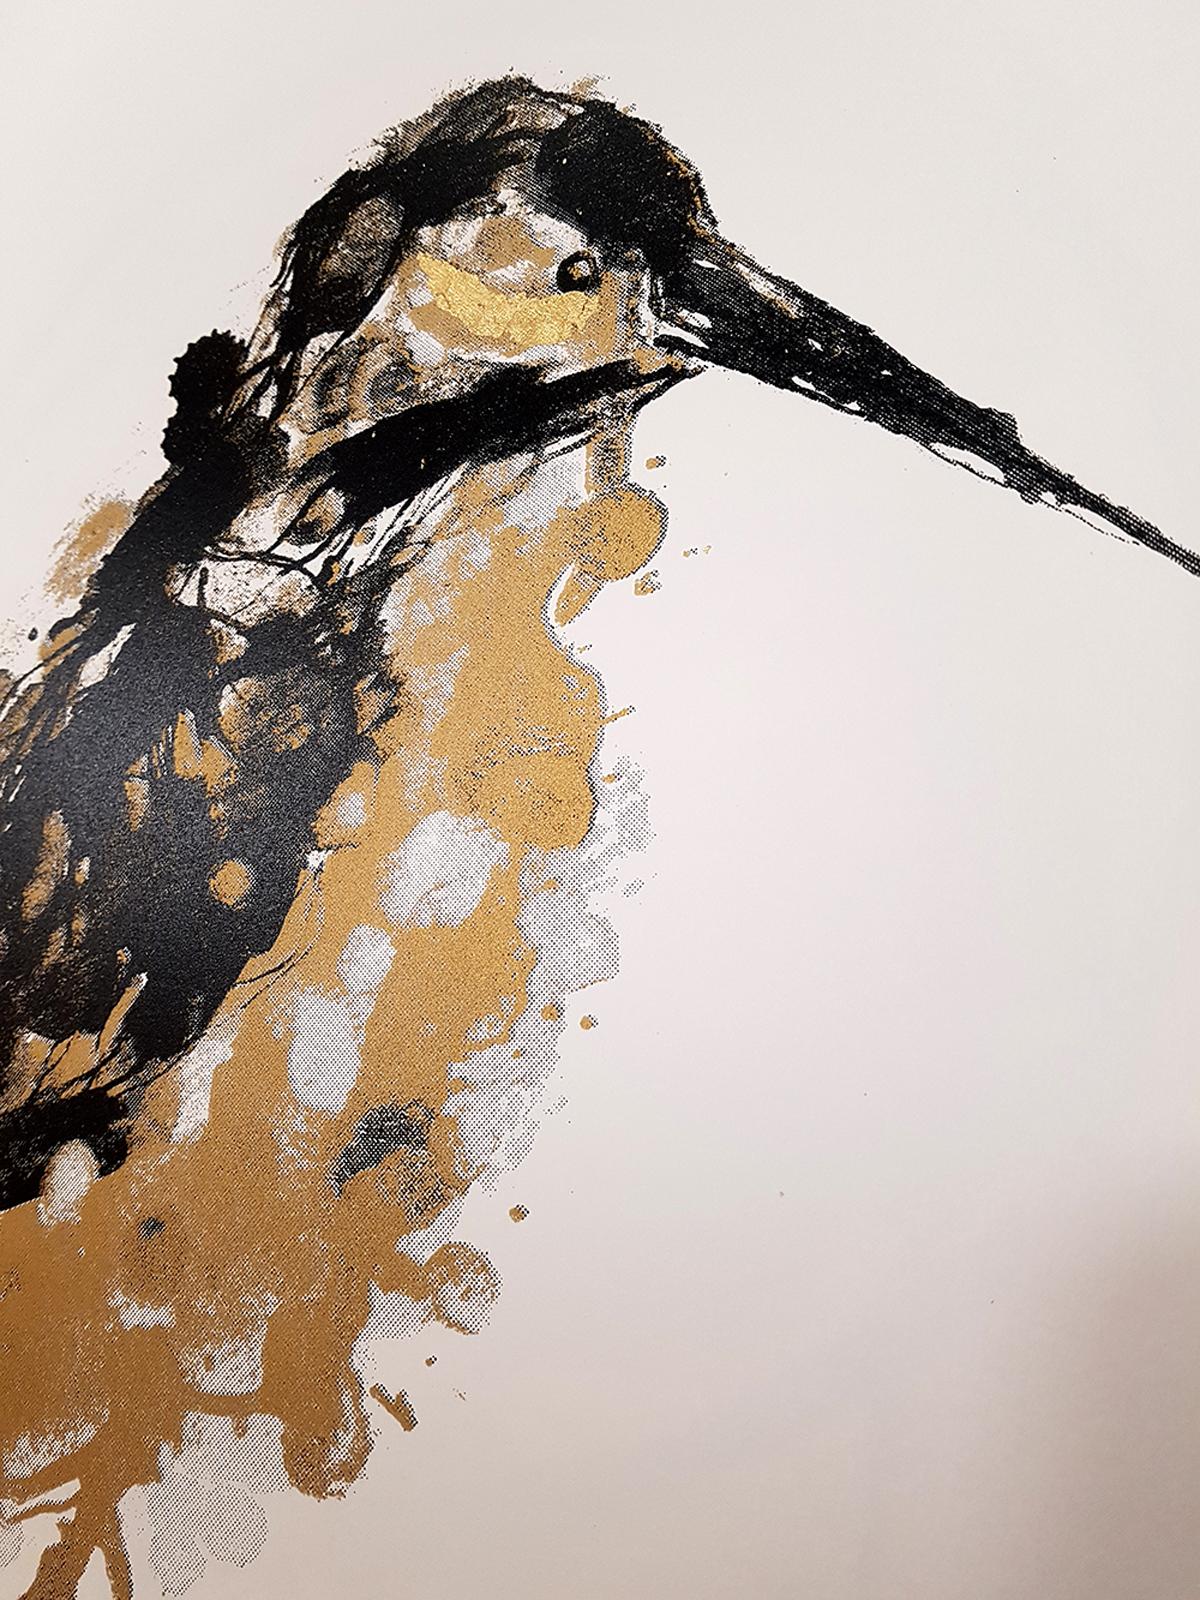 Gavin Dobson
Kingfisher Gold
Limited Edition Silkscreen Print
Edition of 50
Signed and Numbered
Size: H 50cm x W 35cm x D 0.1cm
Sold Unframed
Please note that in situ images are purely an indication of how a piece may look.

Kingfisher Gold is a